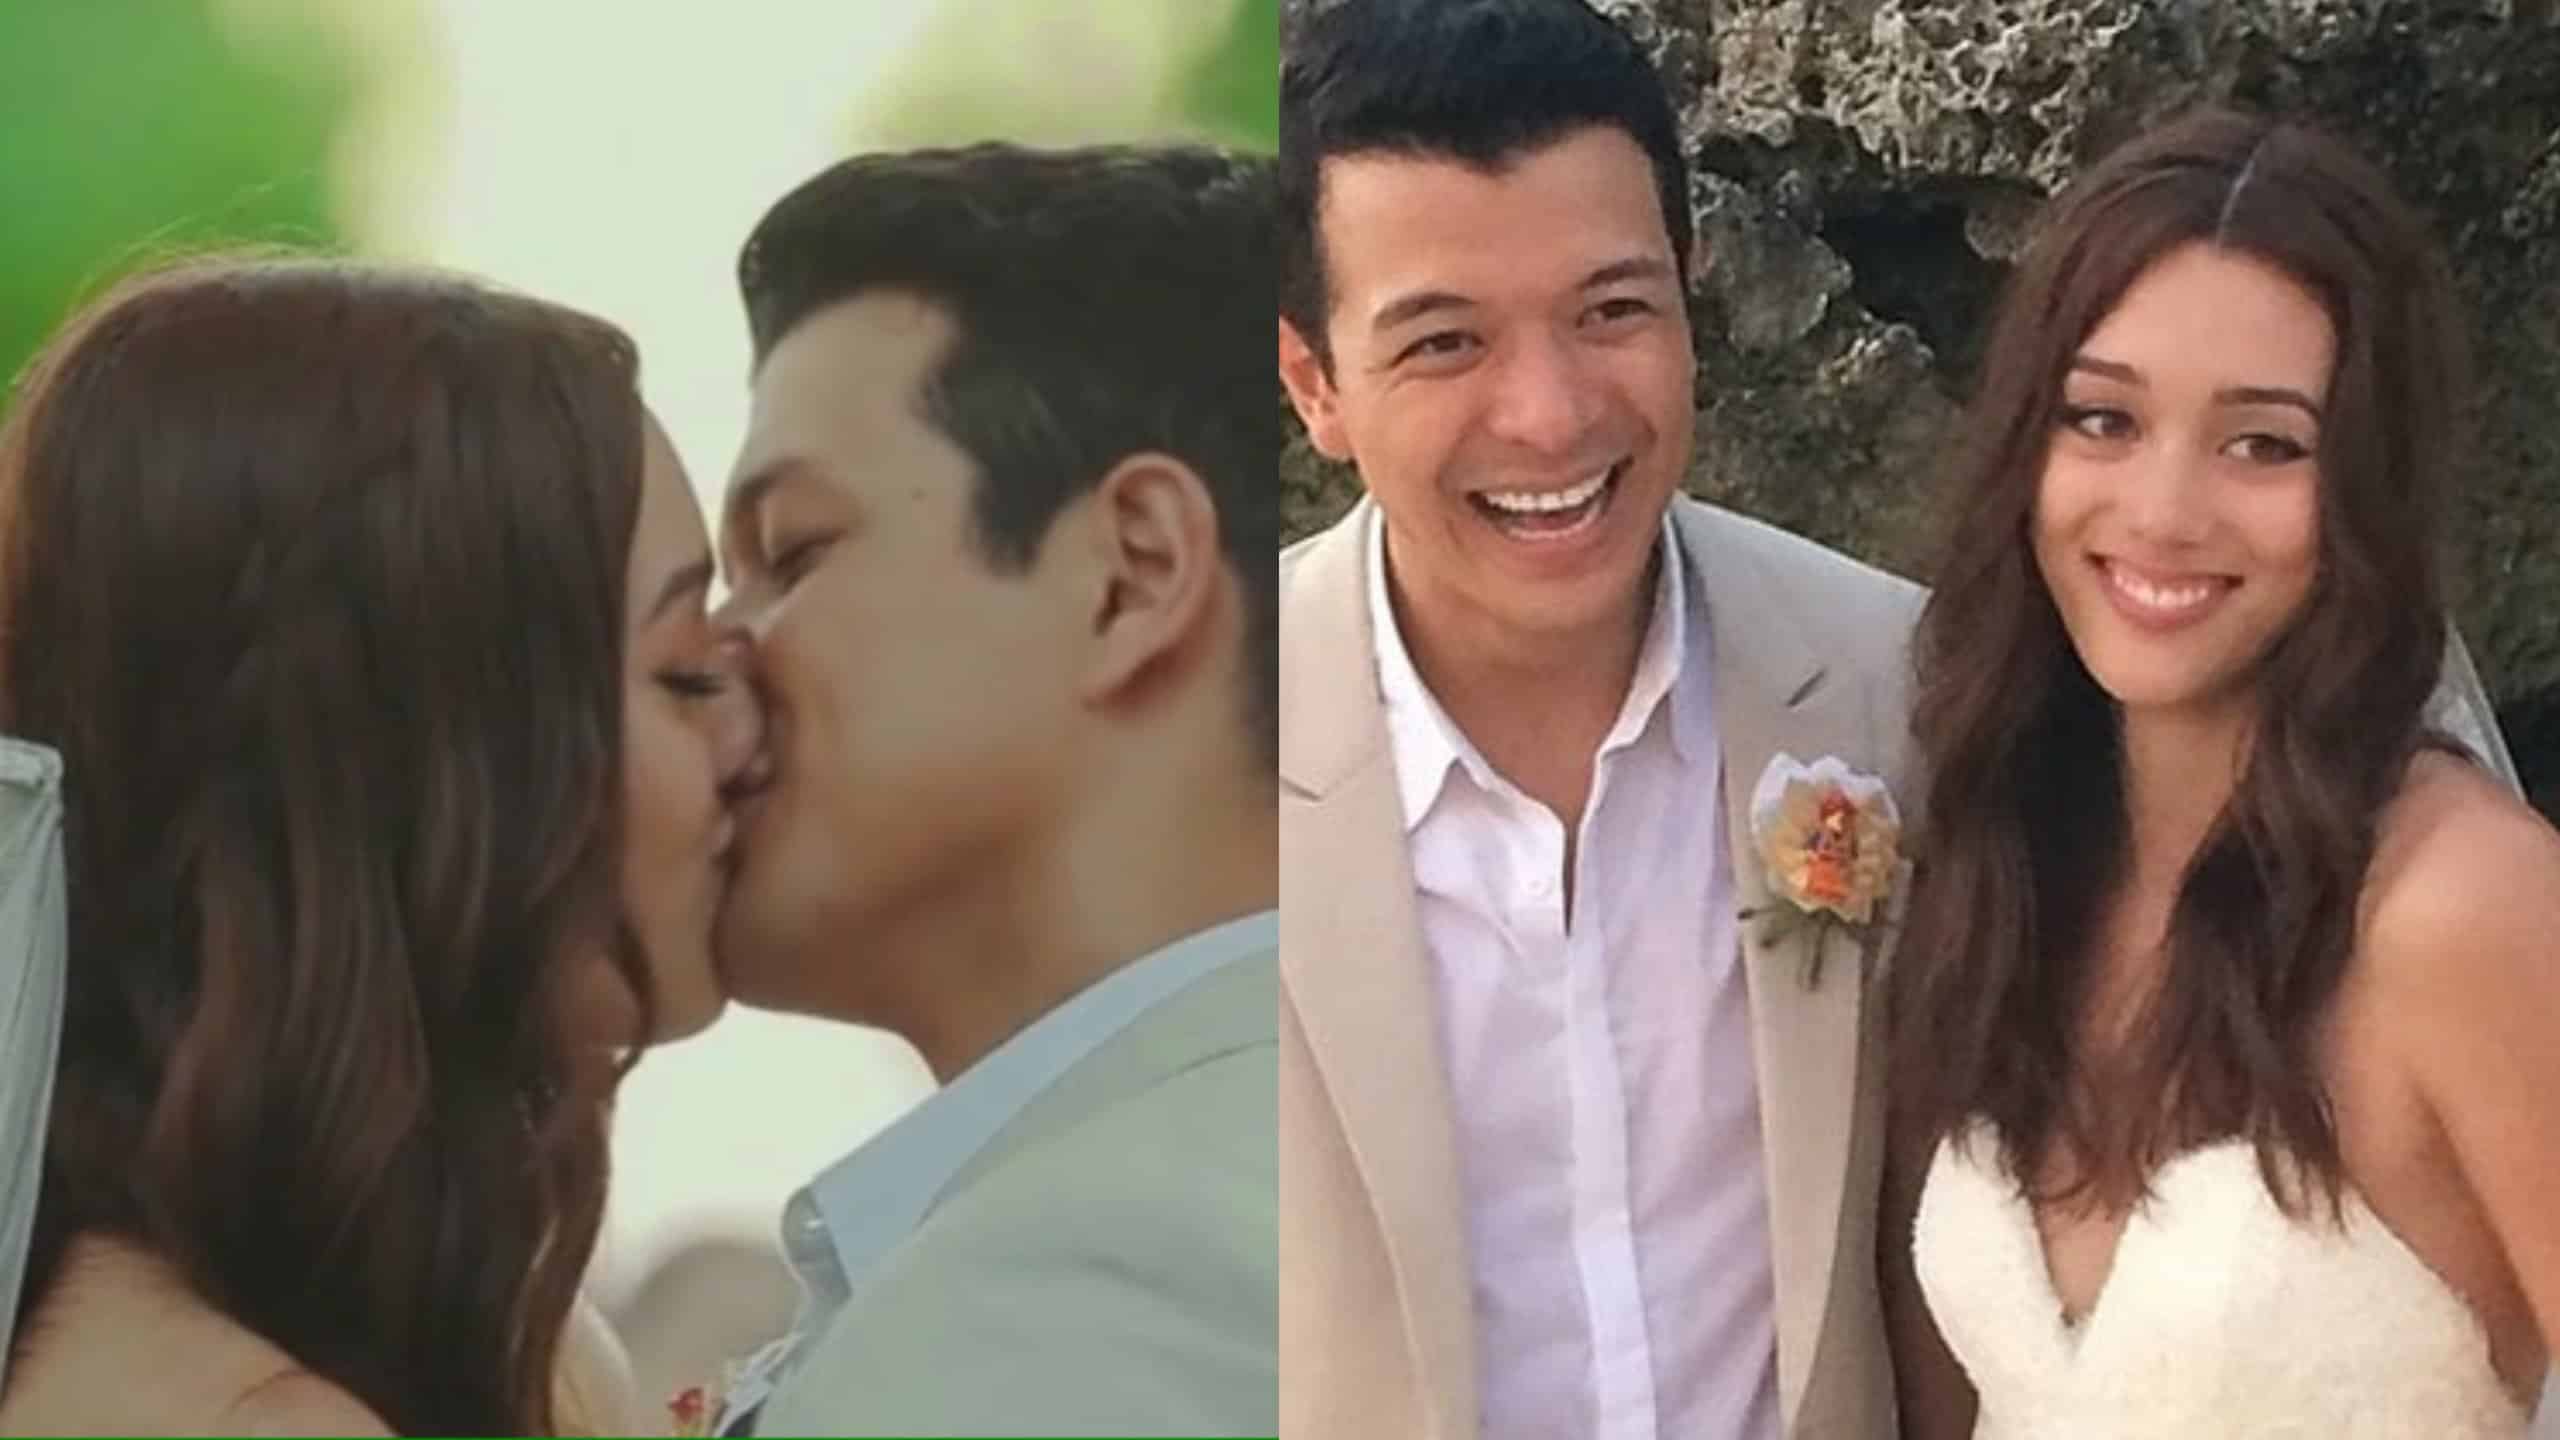 Kim Jones posted on Instagram amid breakup rumors with husband Jericho  Rosales., Full story on the link in our…